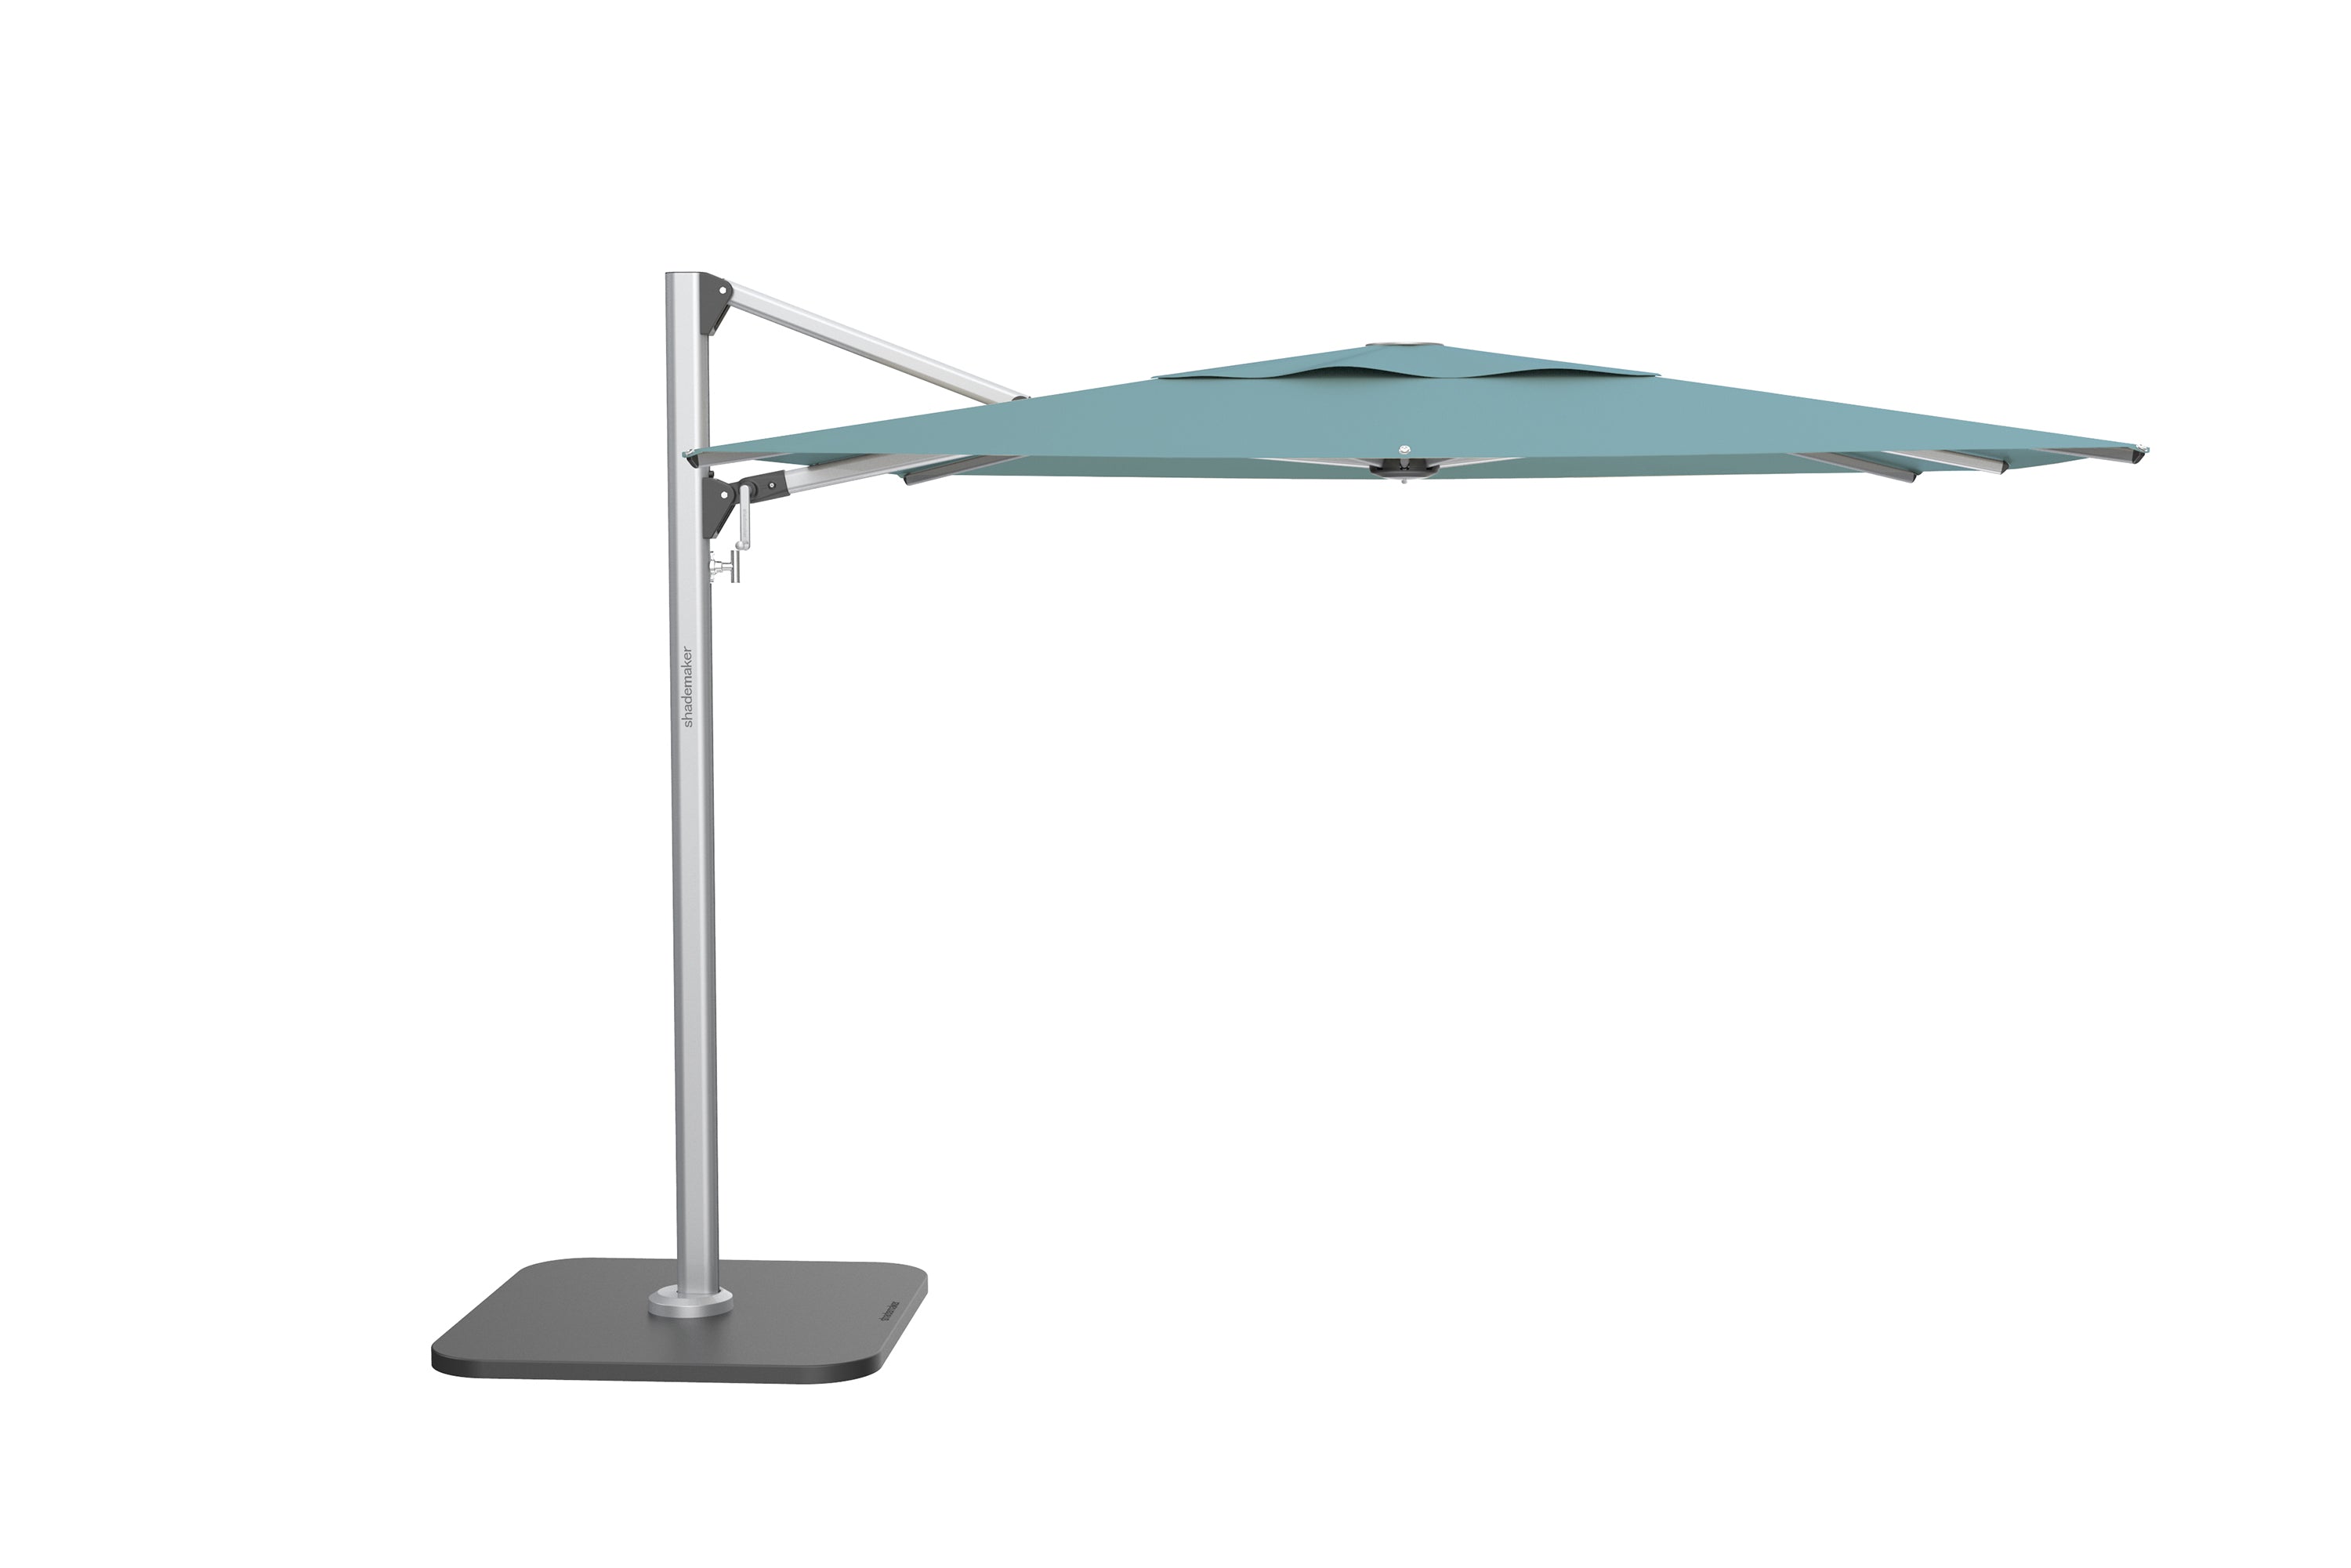 11.5 ft Octagon Solaris Cantilever by Shademaker